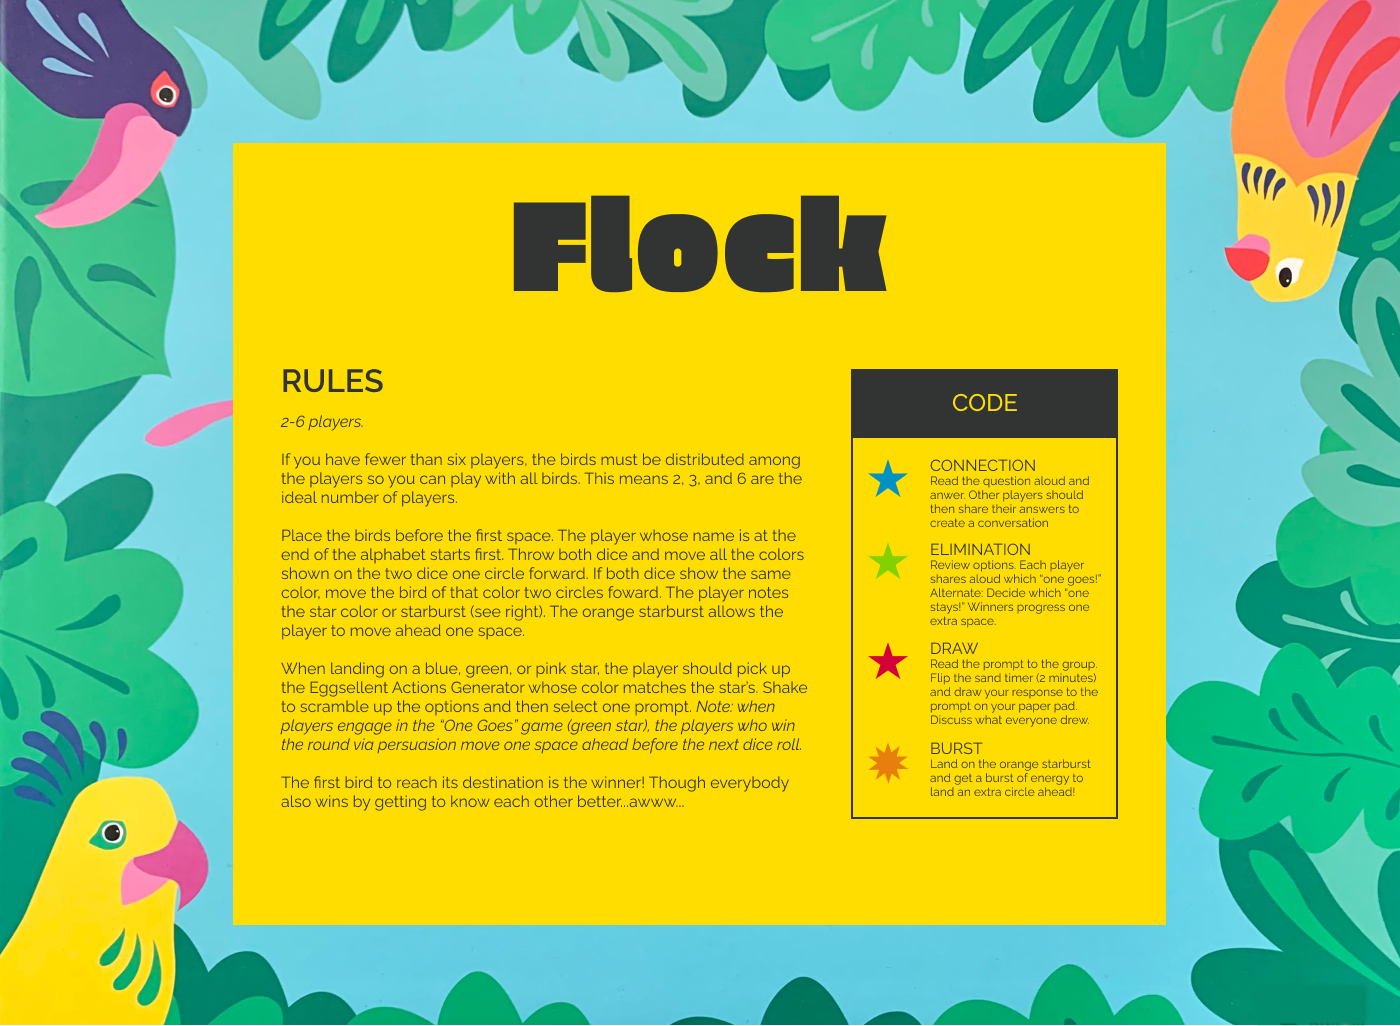 Rules for the game I'm calling Flock!